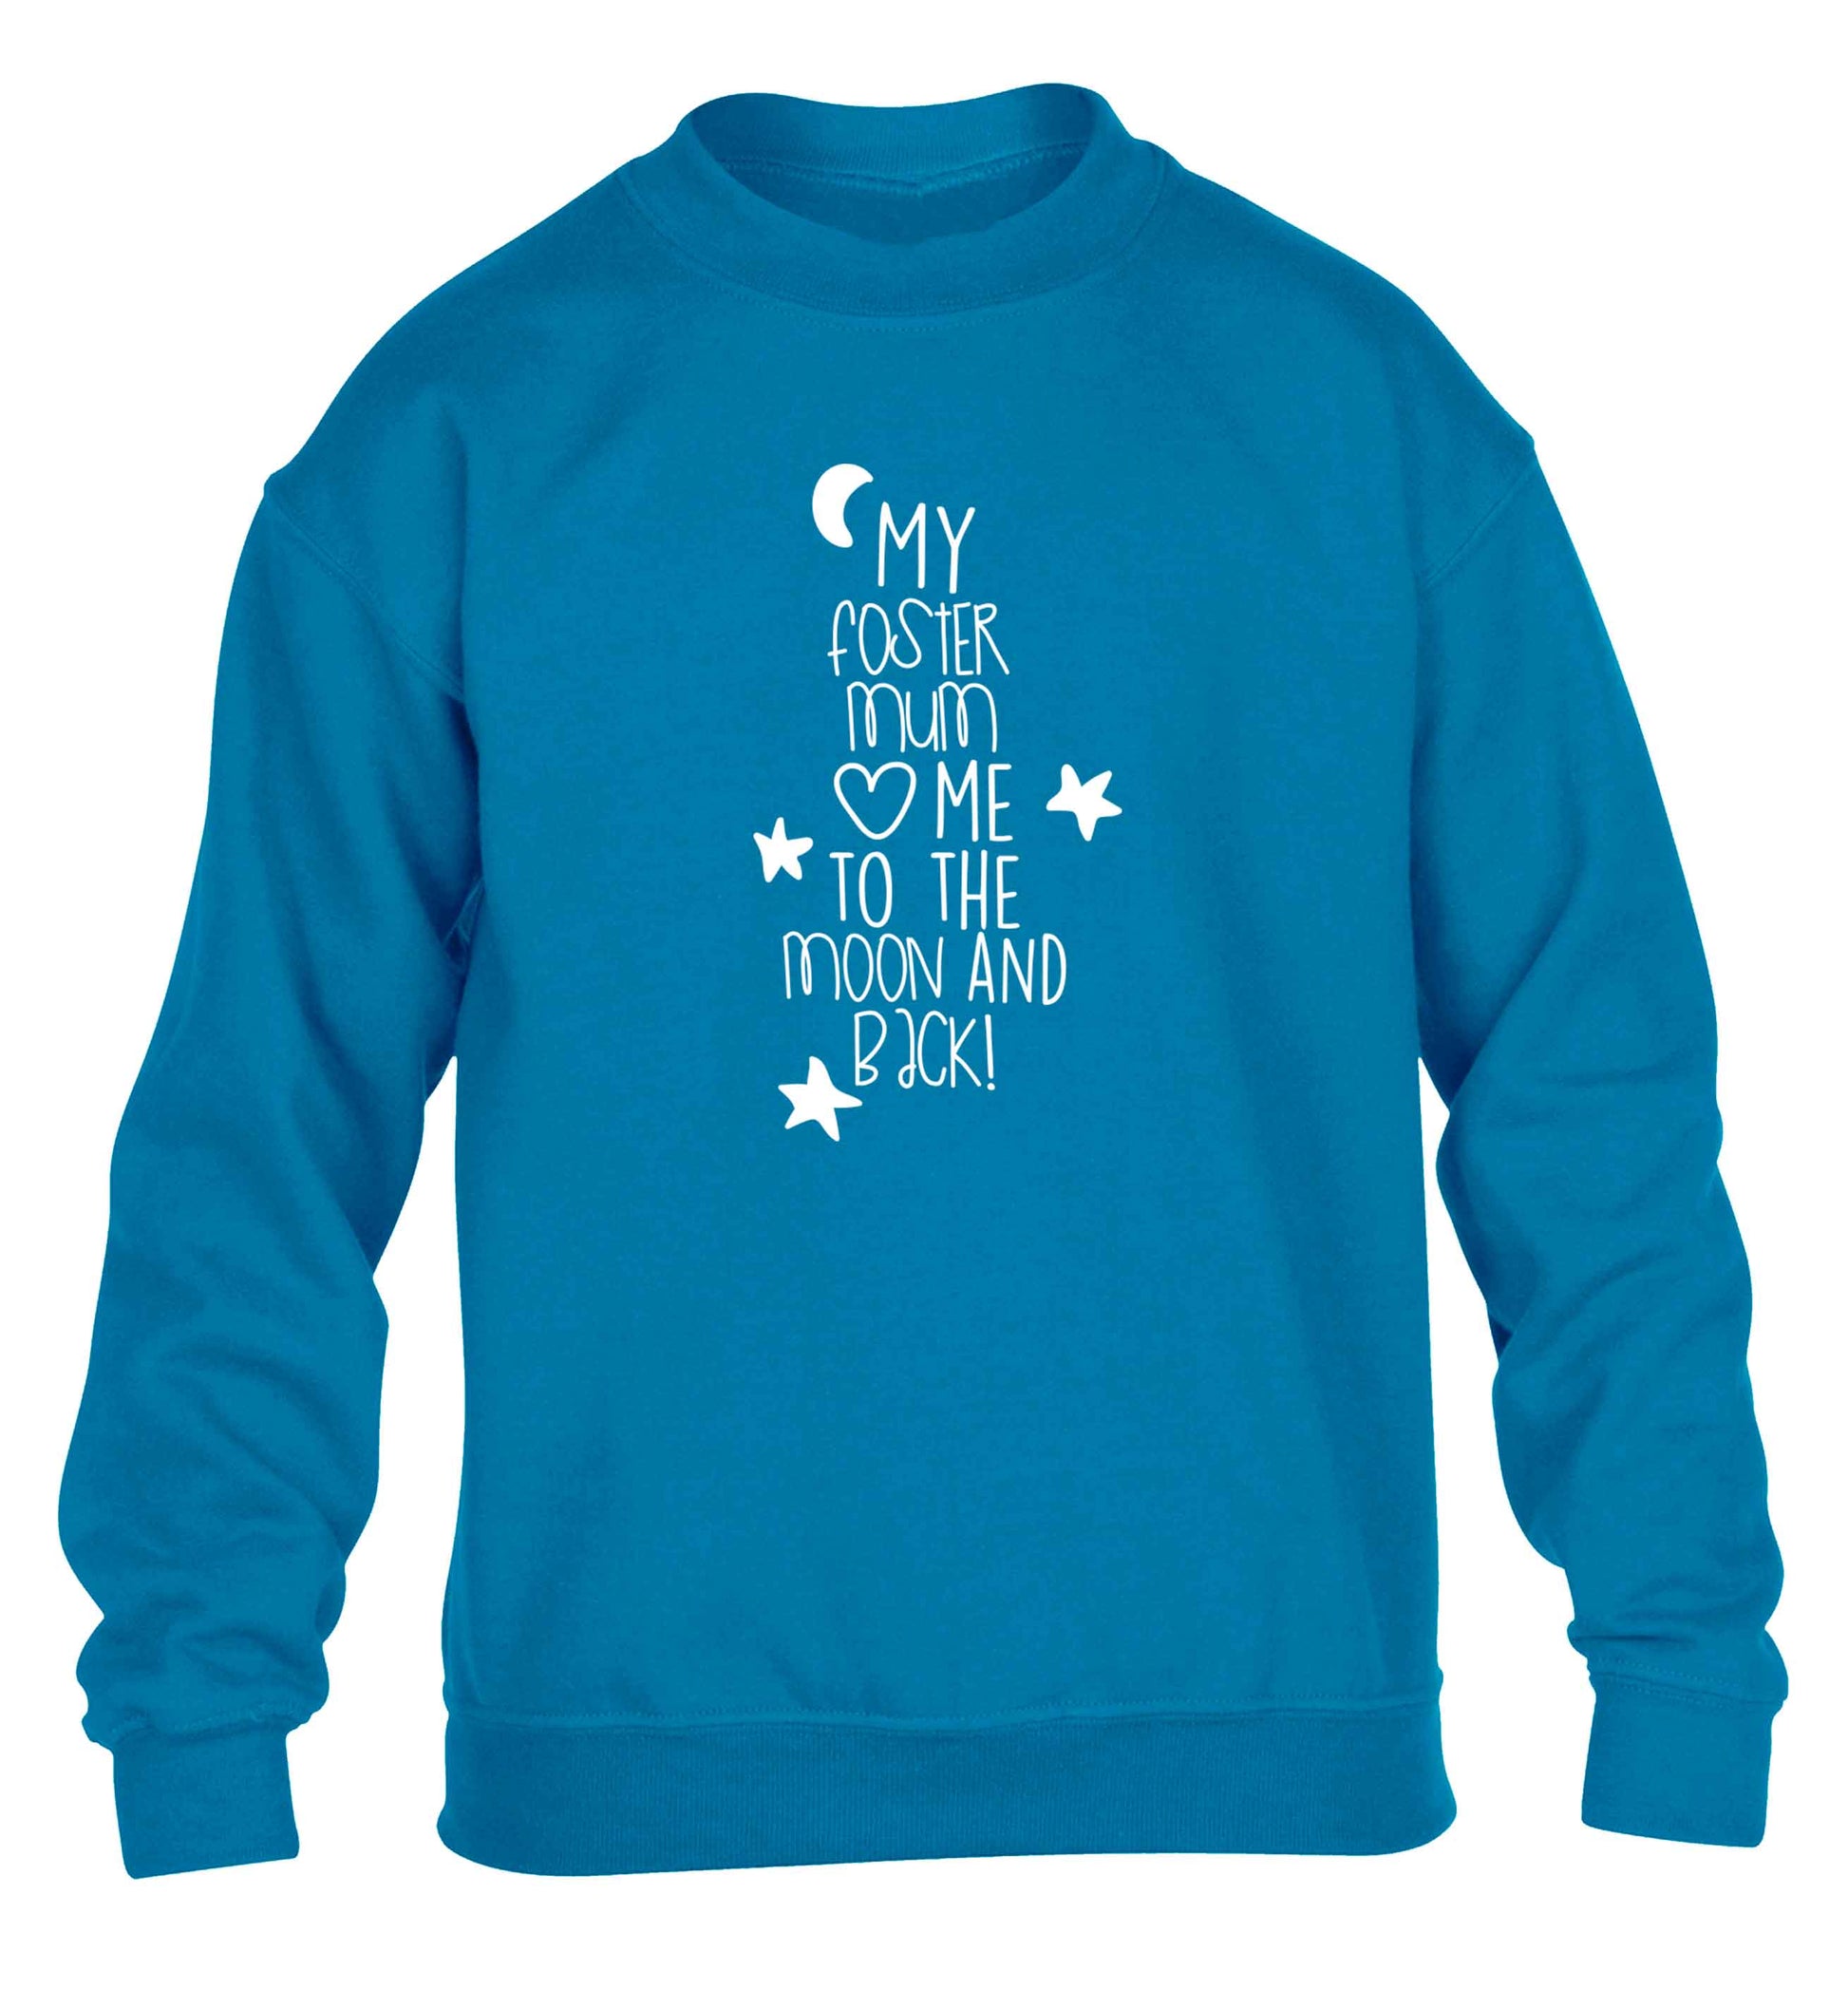 My foster mum loves me to the moon and back children's blue sweater 12-13 Years